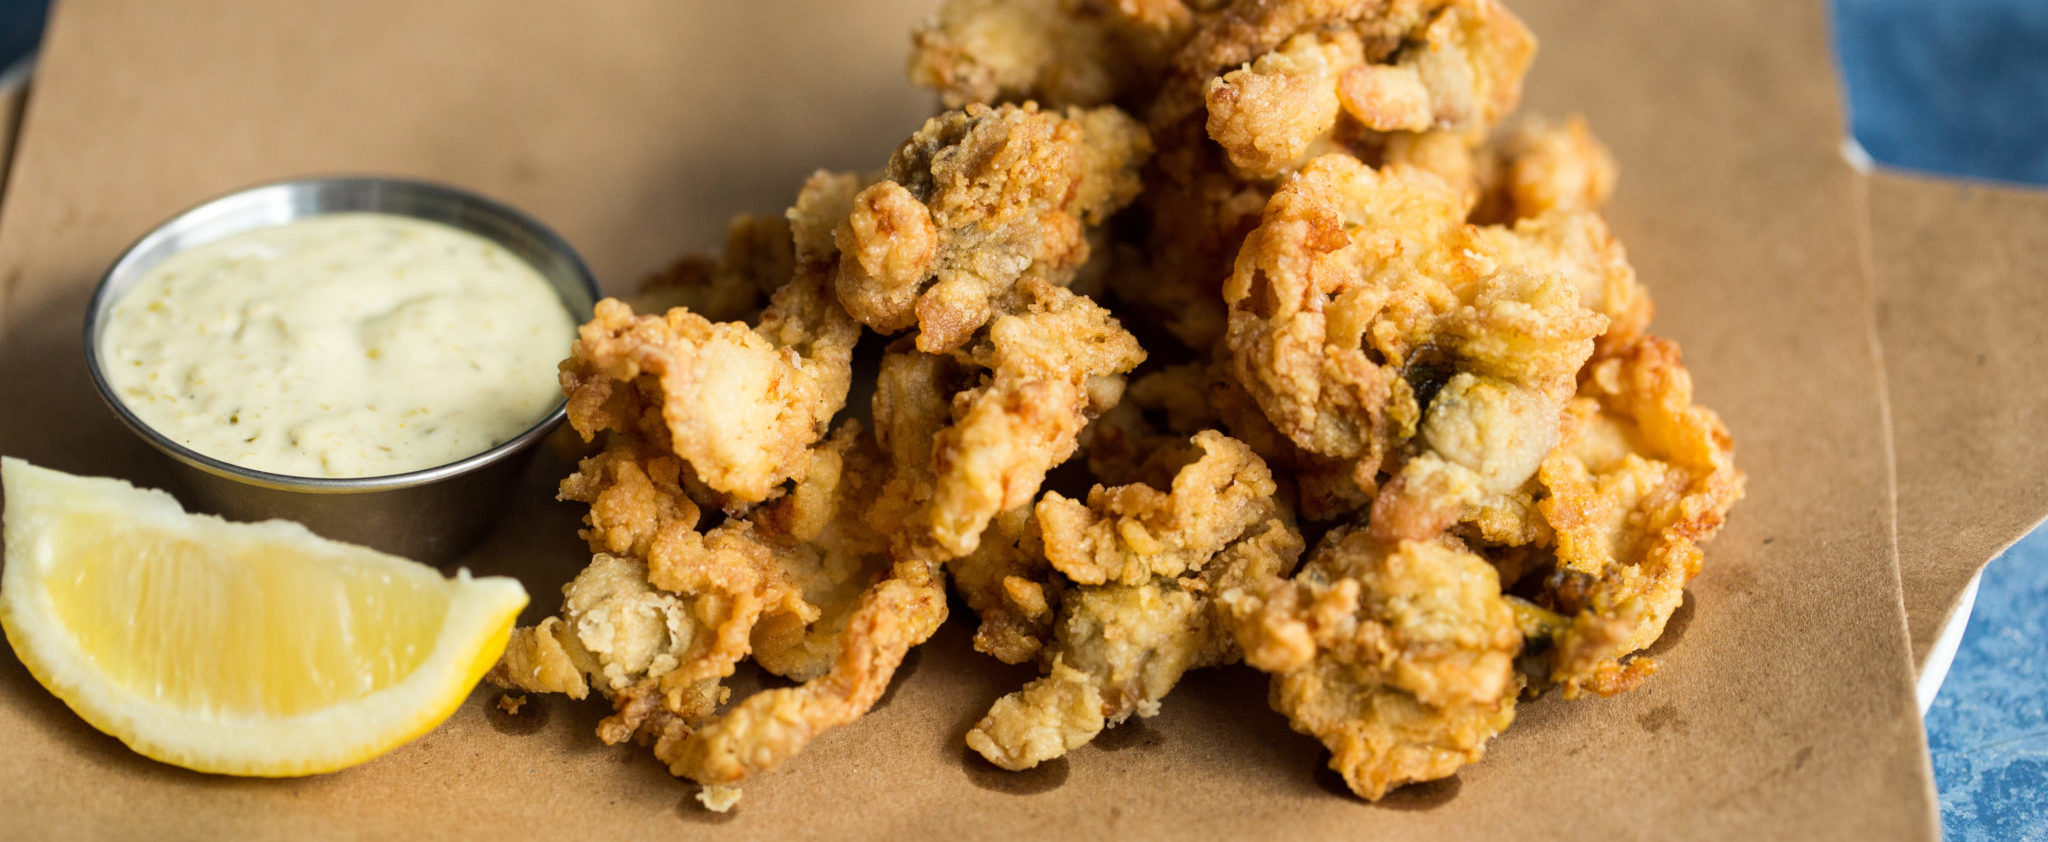 Fried clams from B&G Oysters